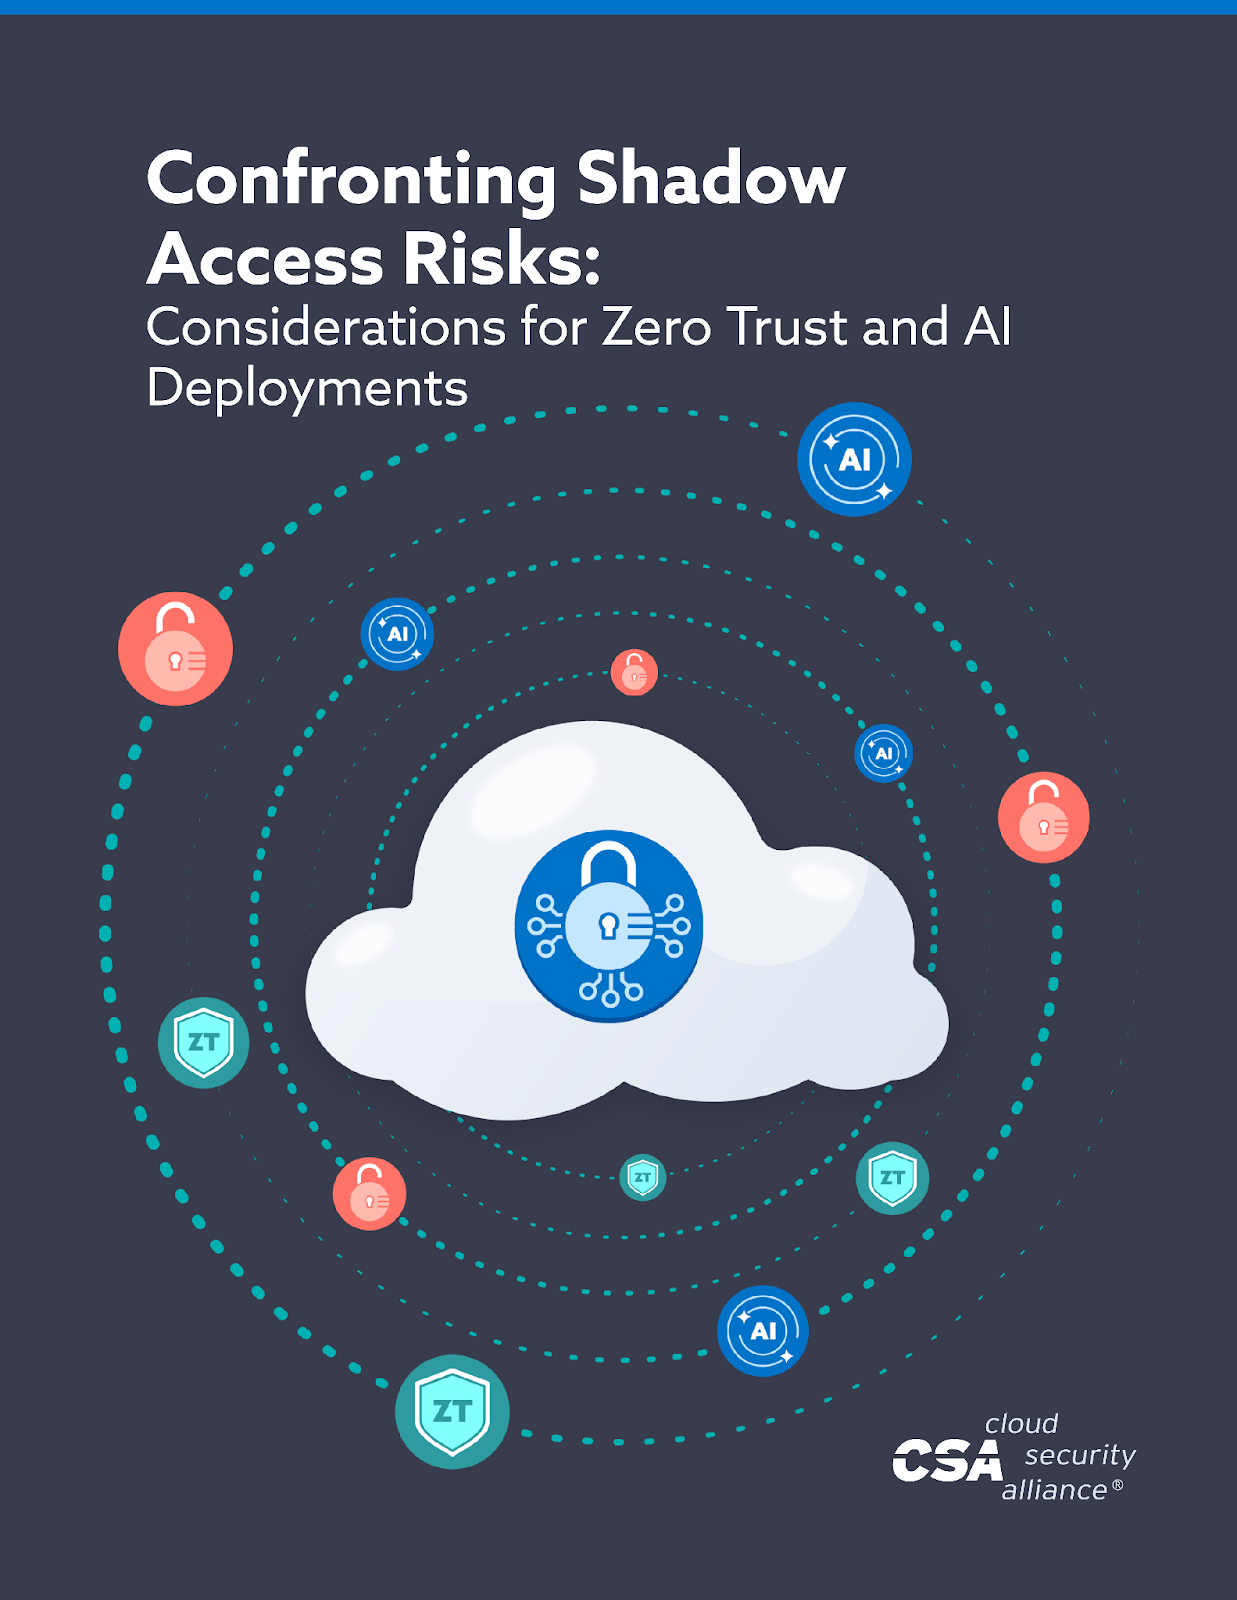 Confronting Shadow Access Risks cover